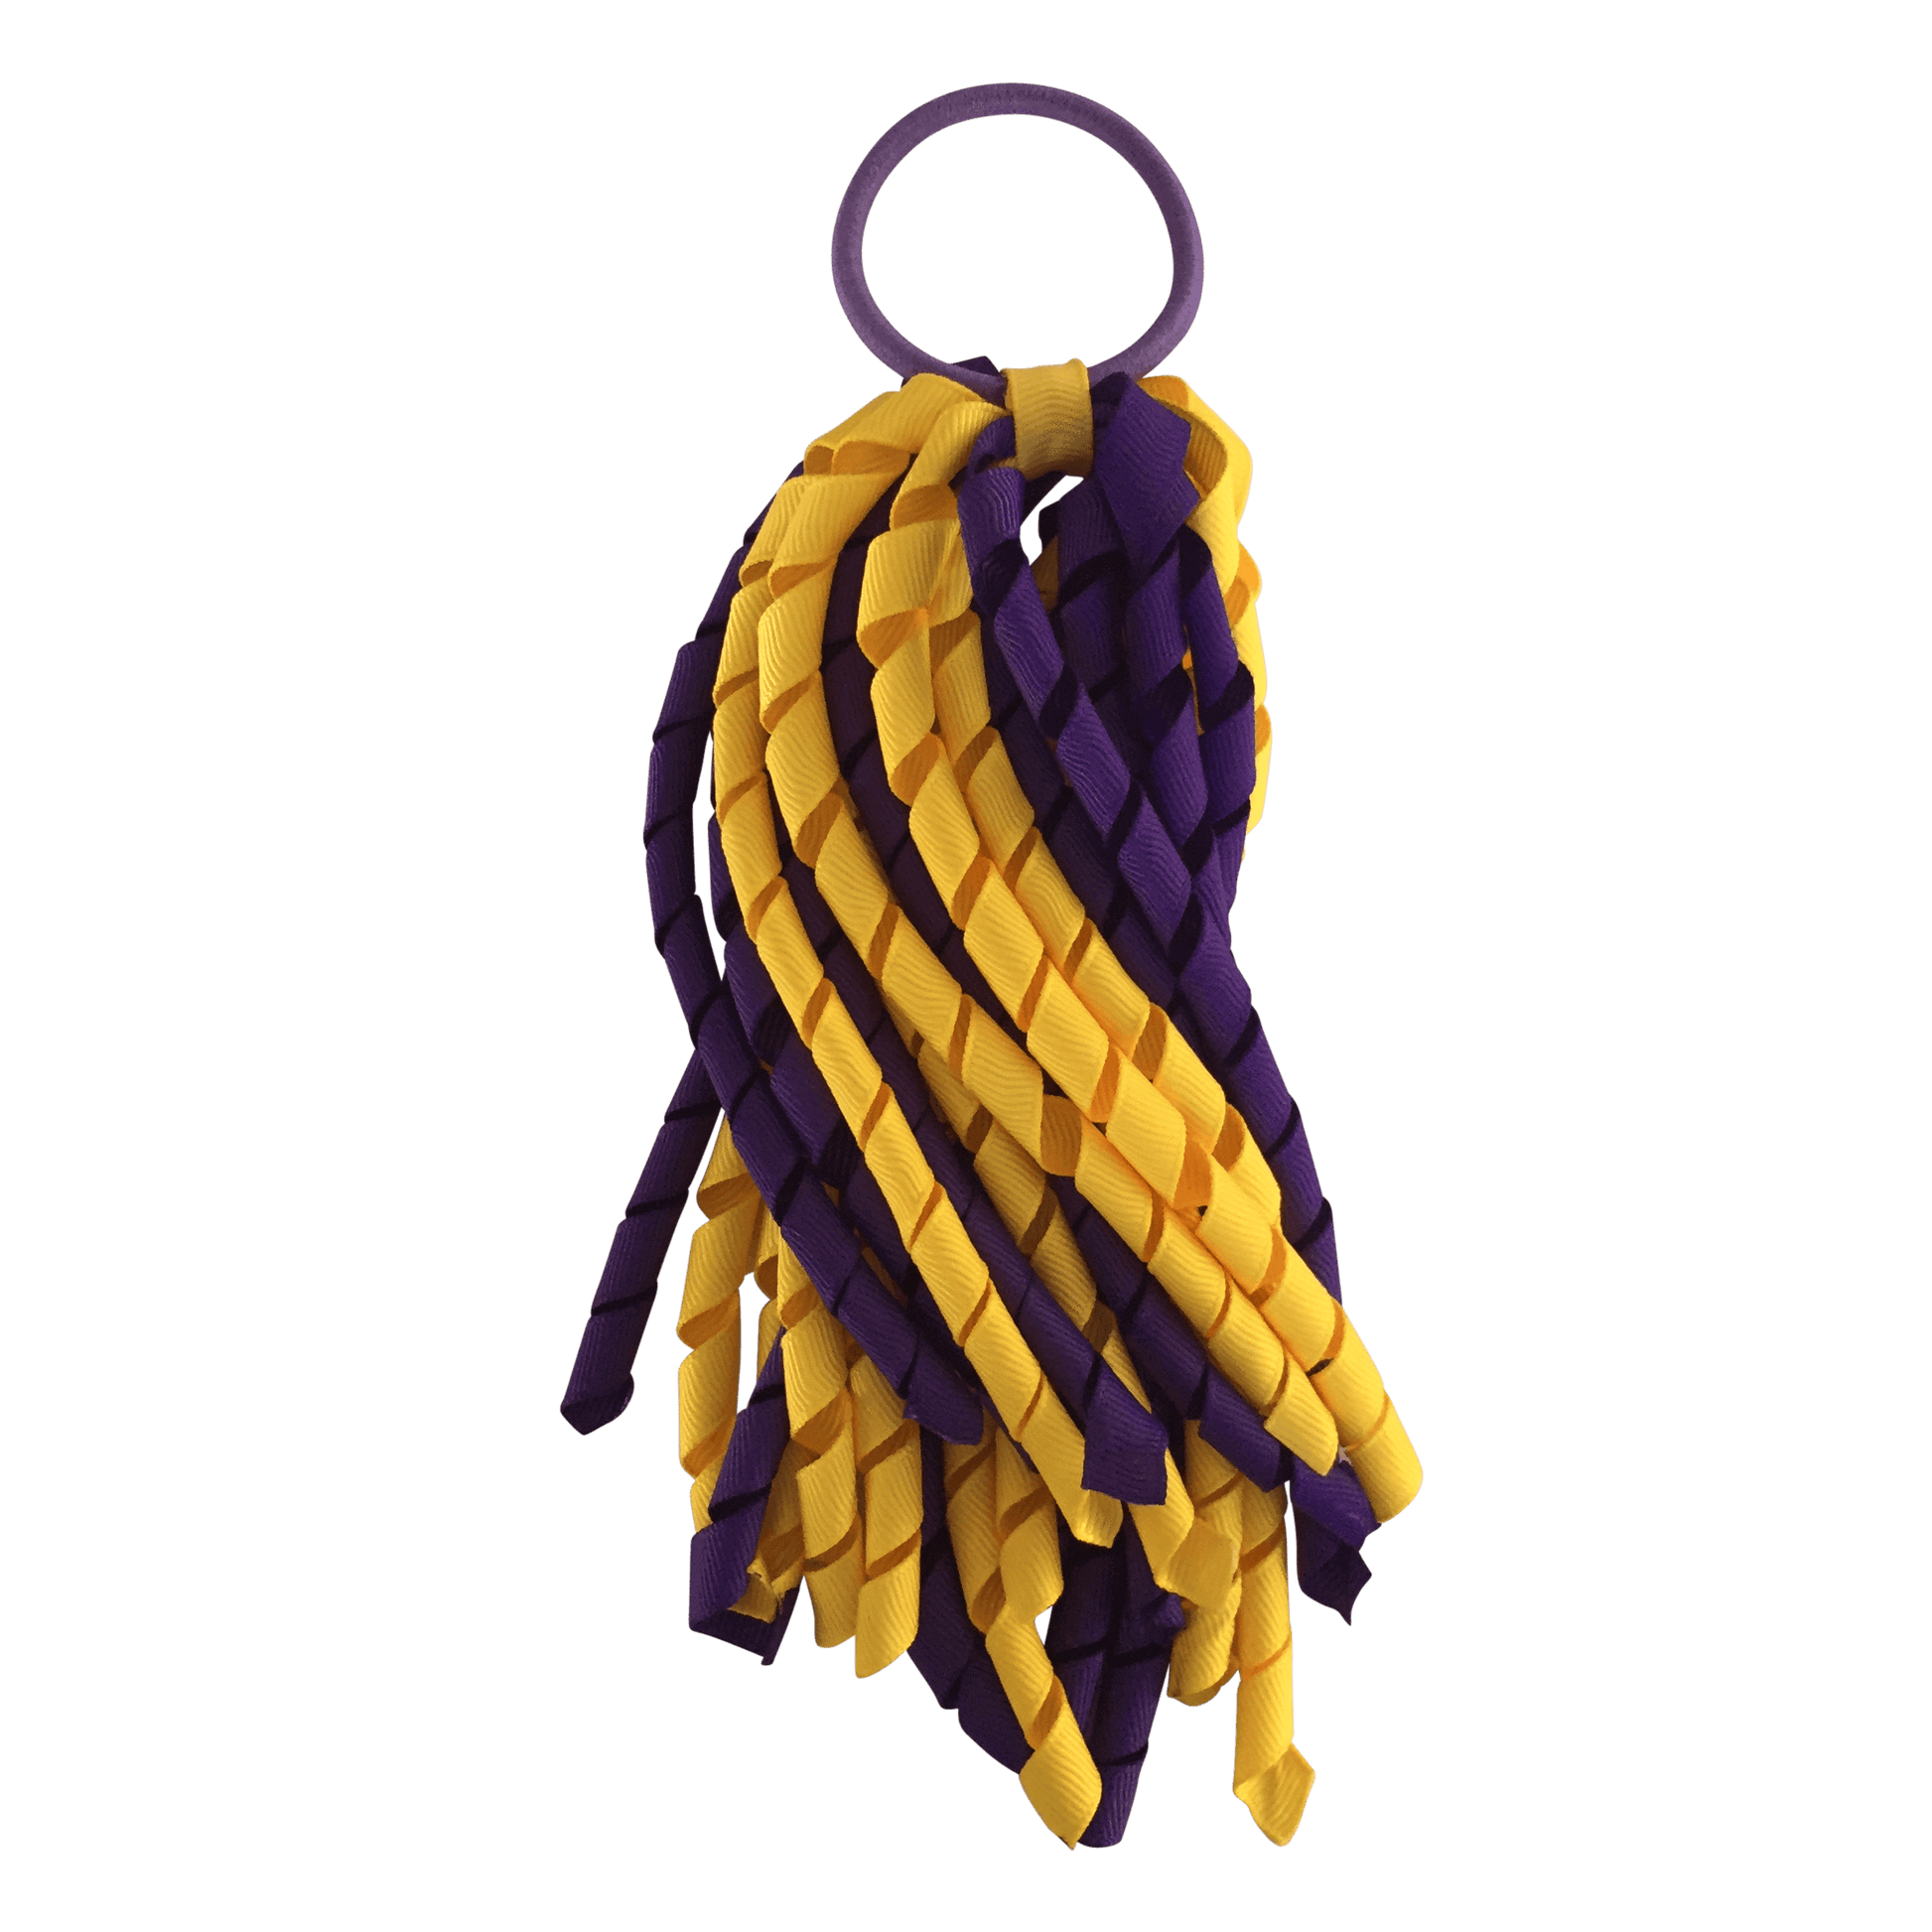 Purple & Yellow Hair Accessories - Ponytails and Fairytales